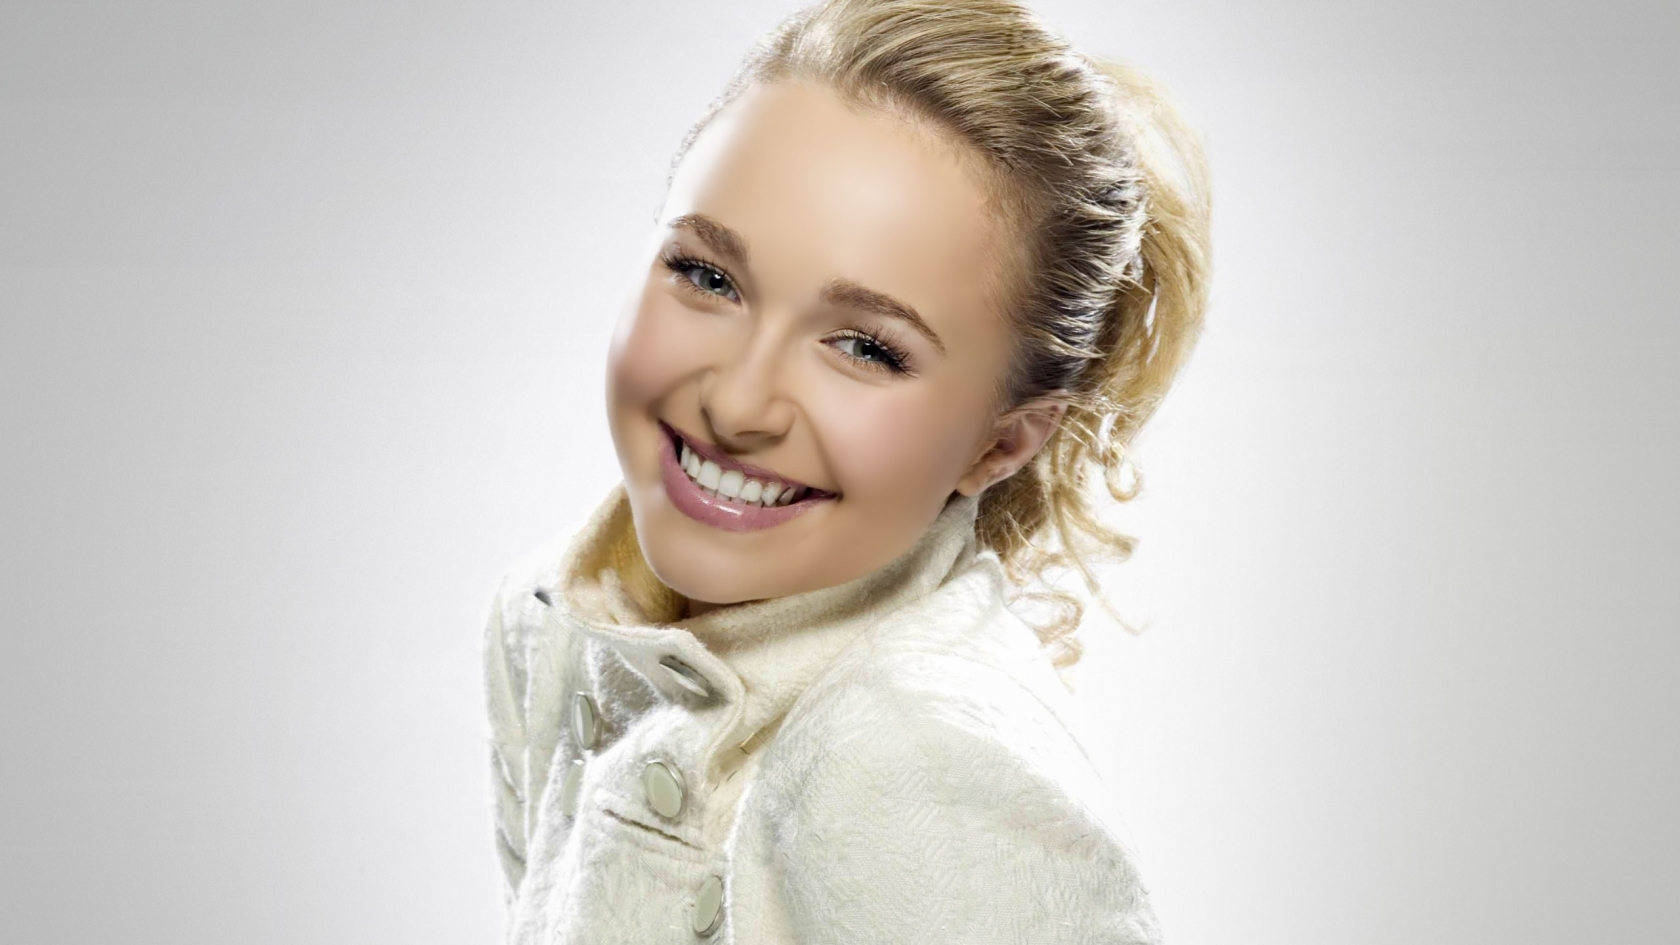 Hayden Panettiere Cute Smile for 1680 x 945 HDTV resolution